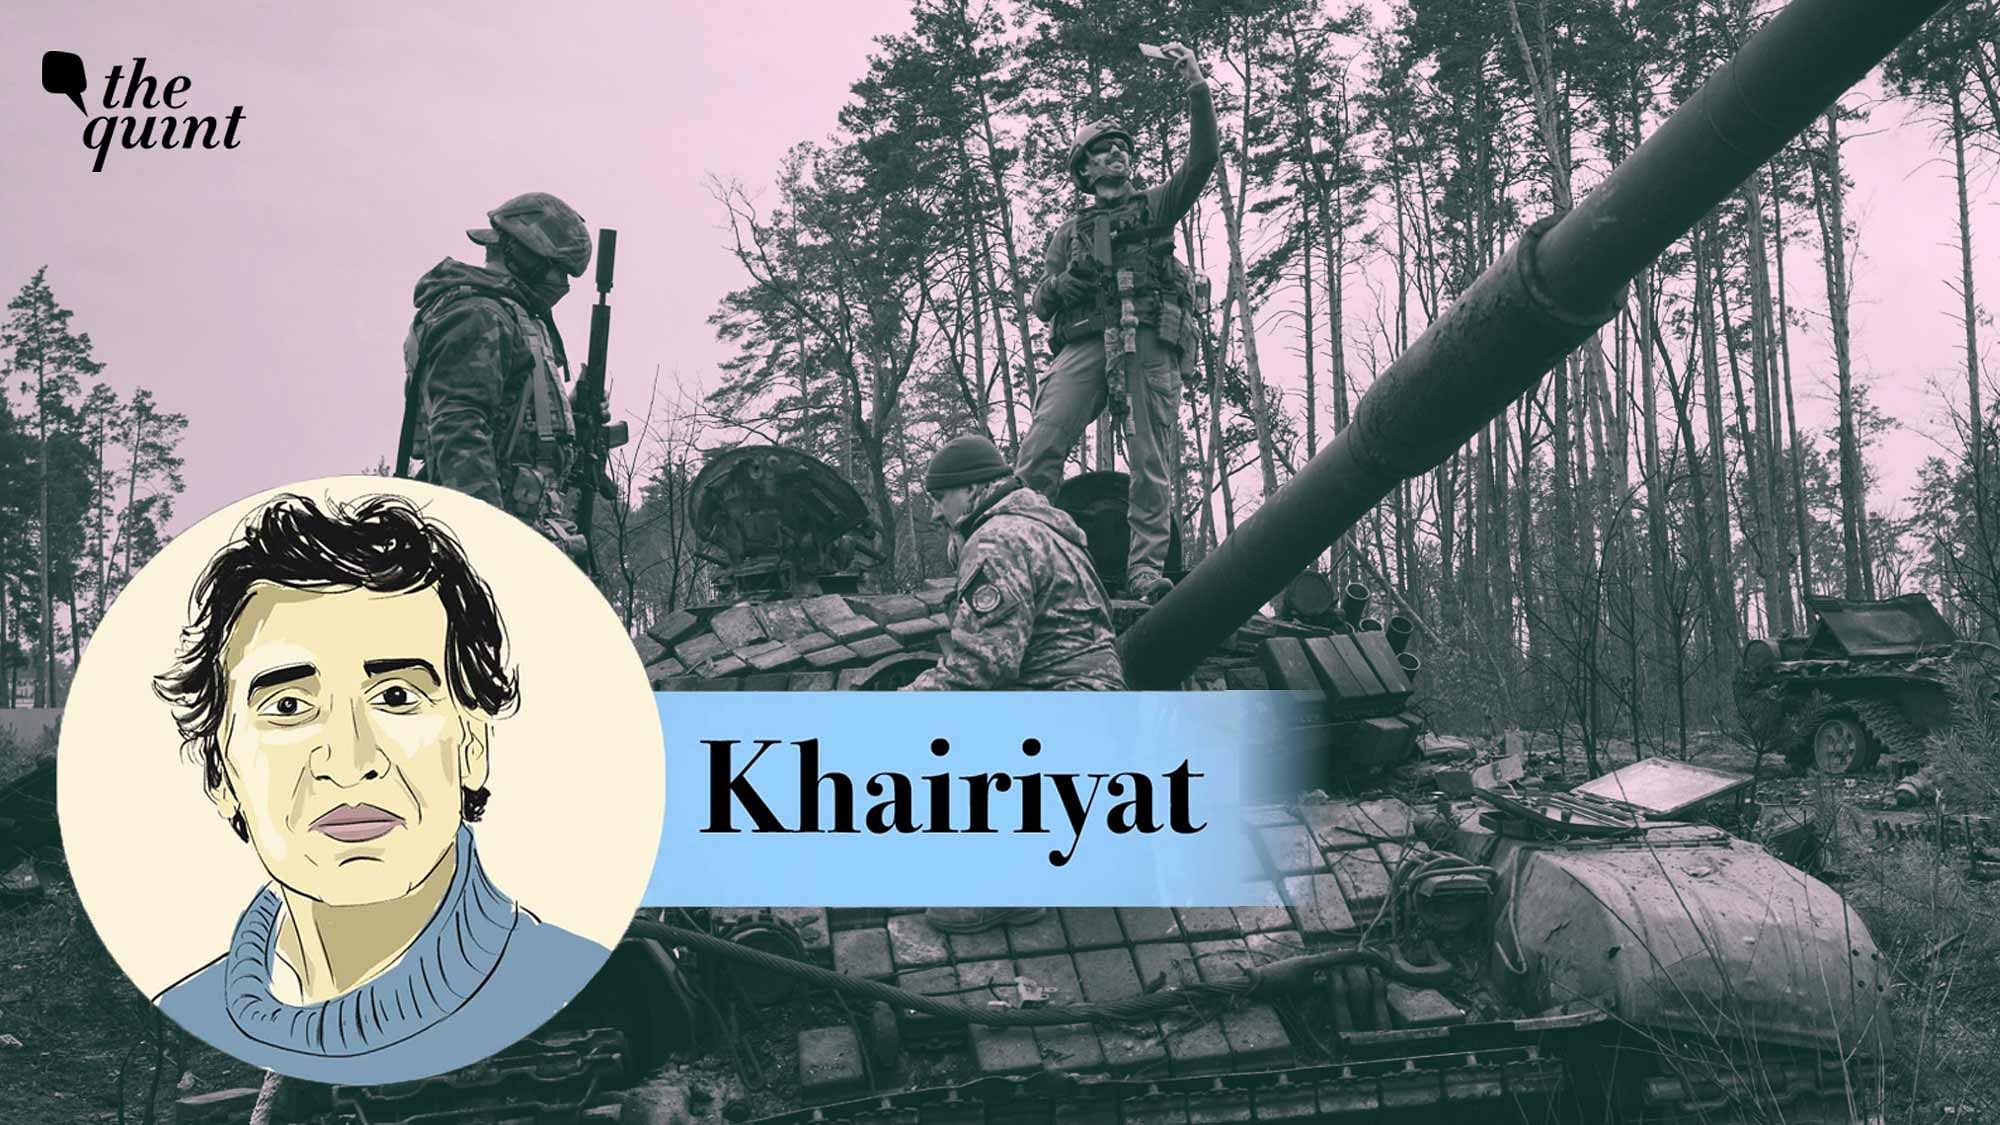 <div class="paragraphs"><p>The Quint brings to you 'Khairiyat', a column by award-winning author Tabish Khair, where he talks about the politics of race, the experiences of diasporas, Europe-India dynamics and the interplay of culture, history and society, among other issues of global significance.</p></div>